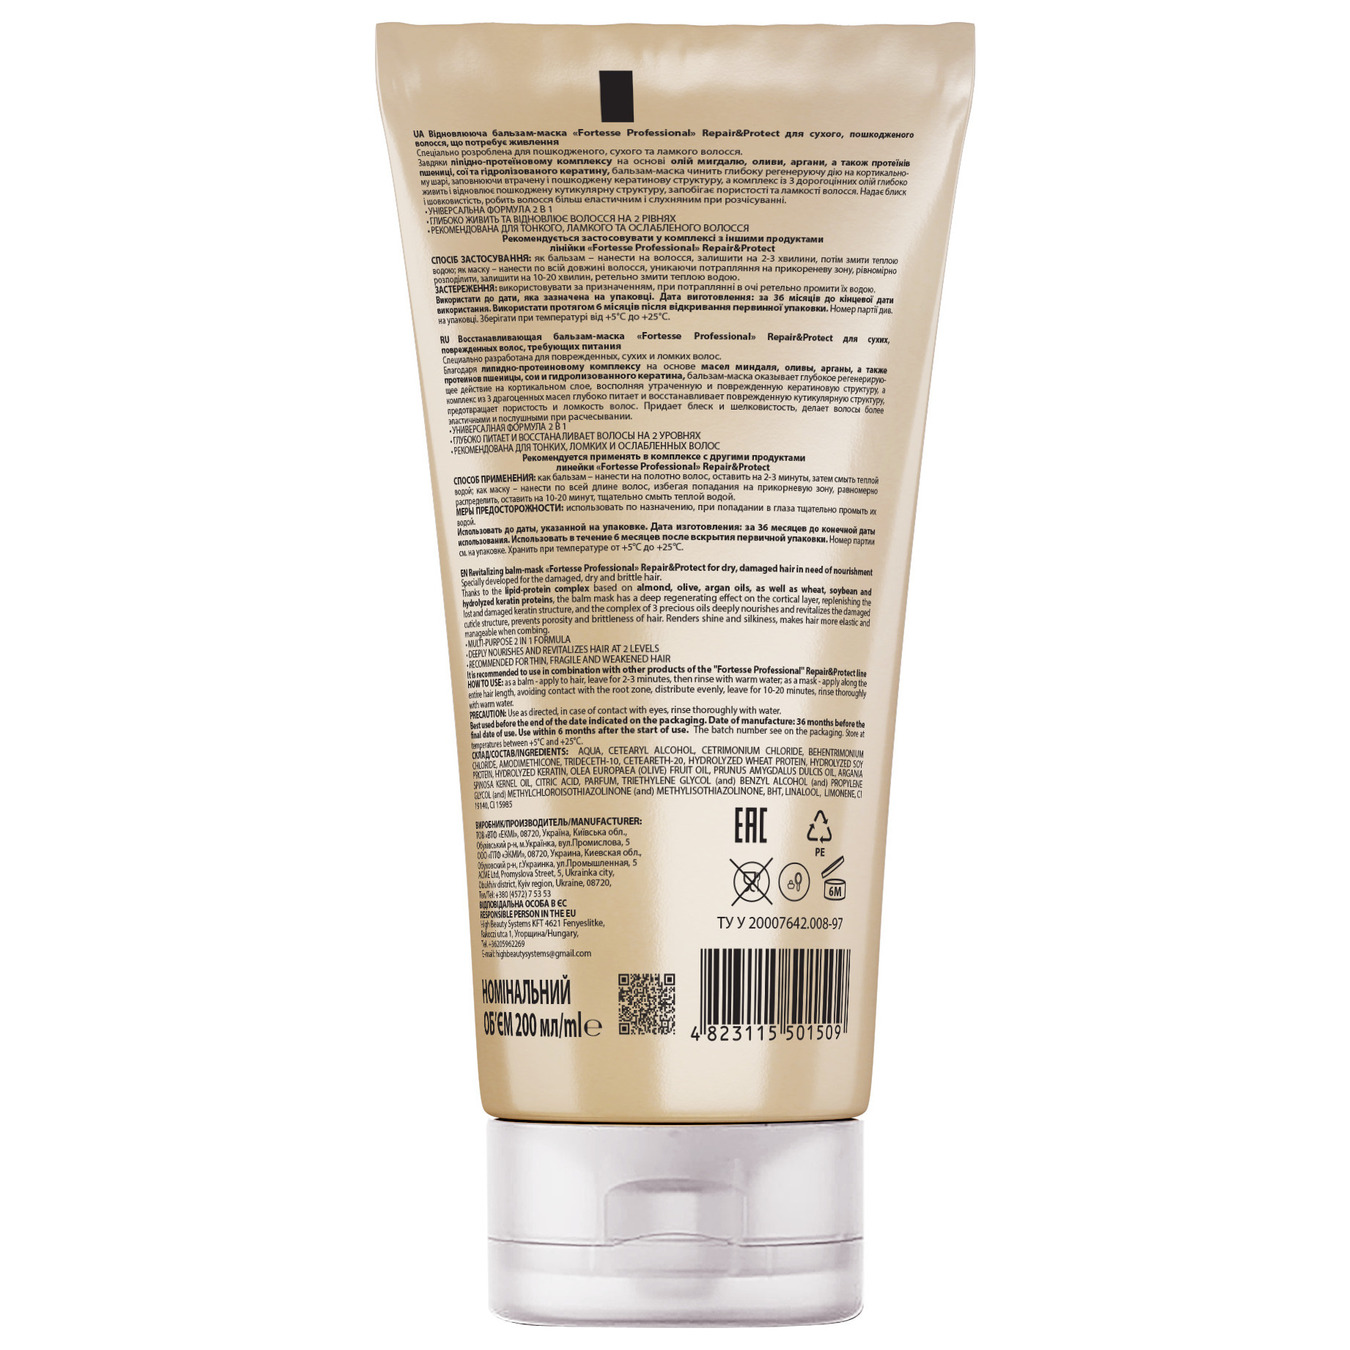 Balm-mask Fortesse Professional Repair&Protect restorative for dry damaged hair 200ml 3